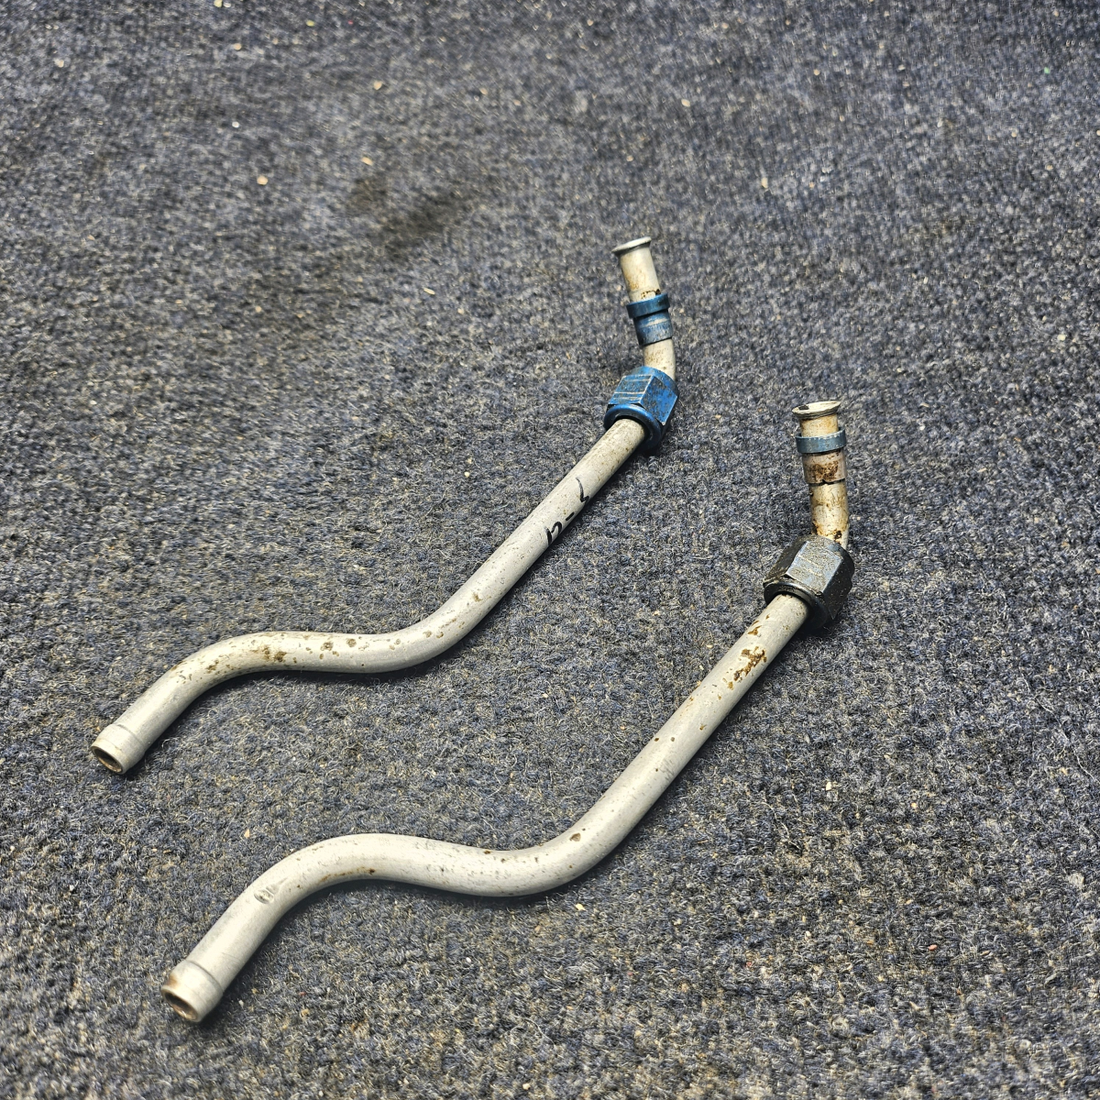 Used aircraft parts for sale, 68761 Lycoming O-320 TUBE ASSY OIL DRAIN "PRICE PER EACH"